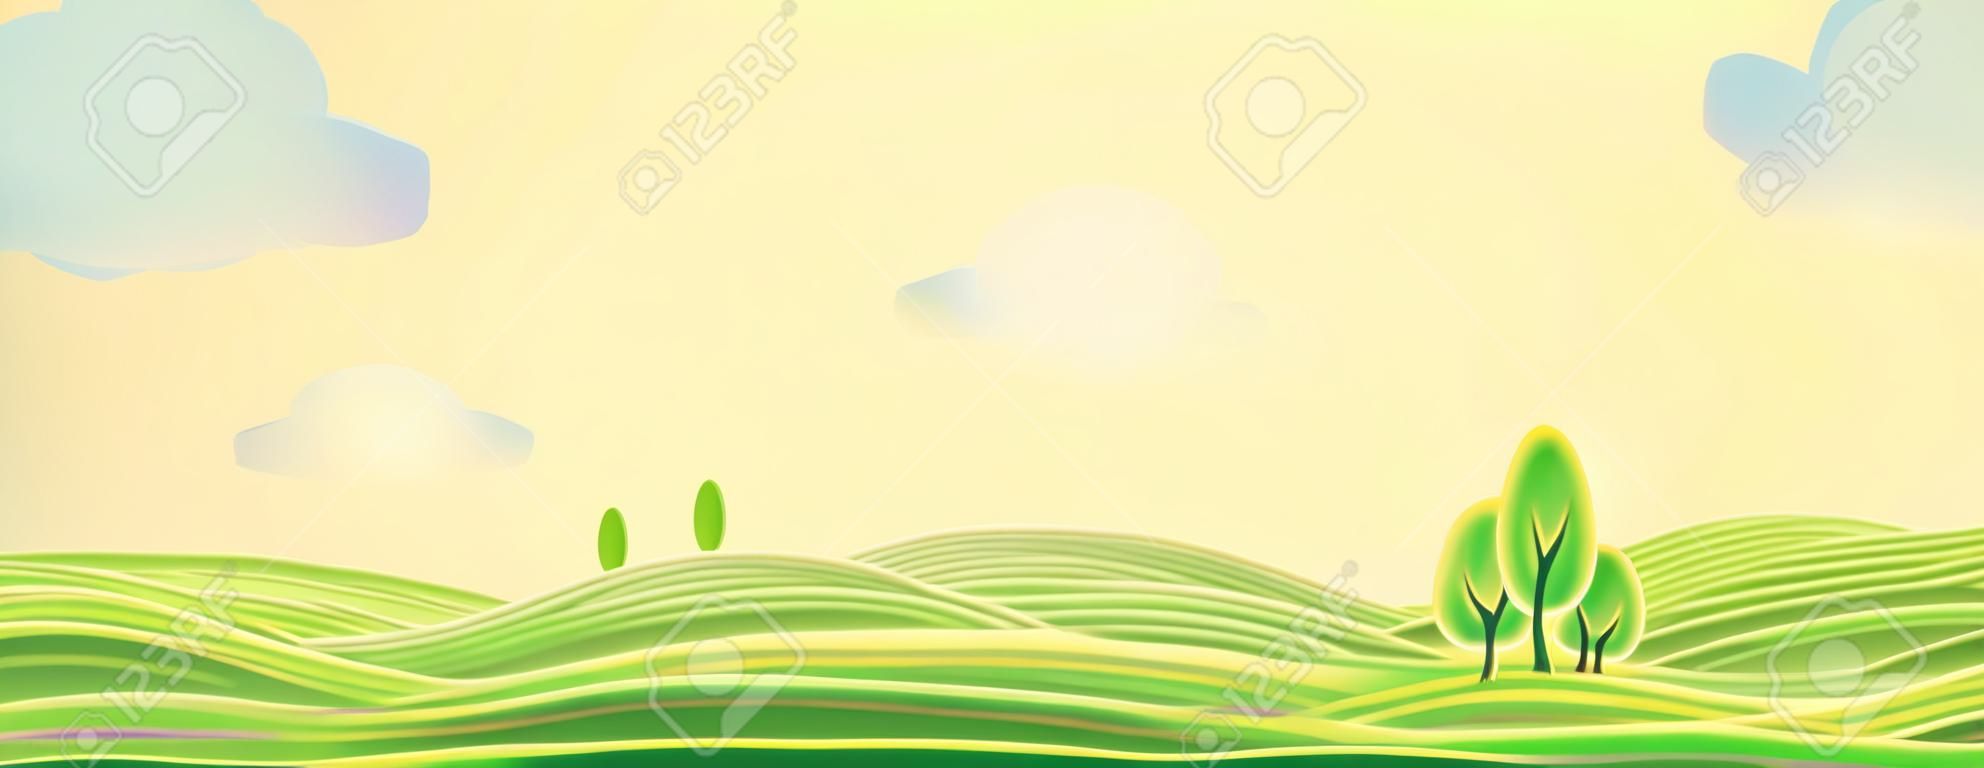 Summer rural landscape, panorama view, sunrise over the hills, can be used as background image.